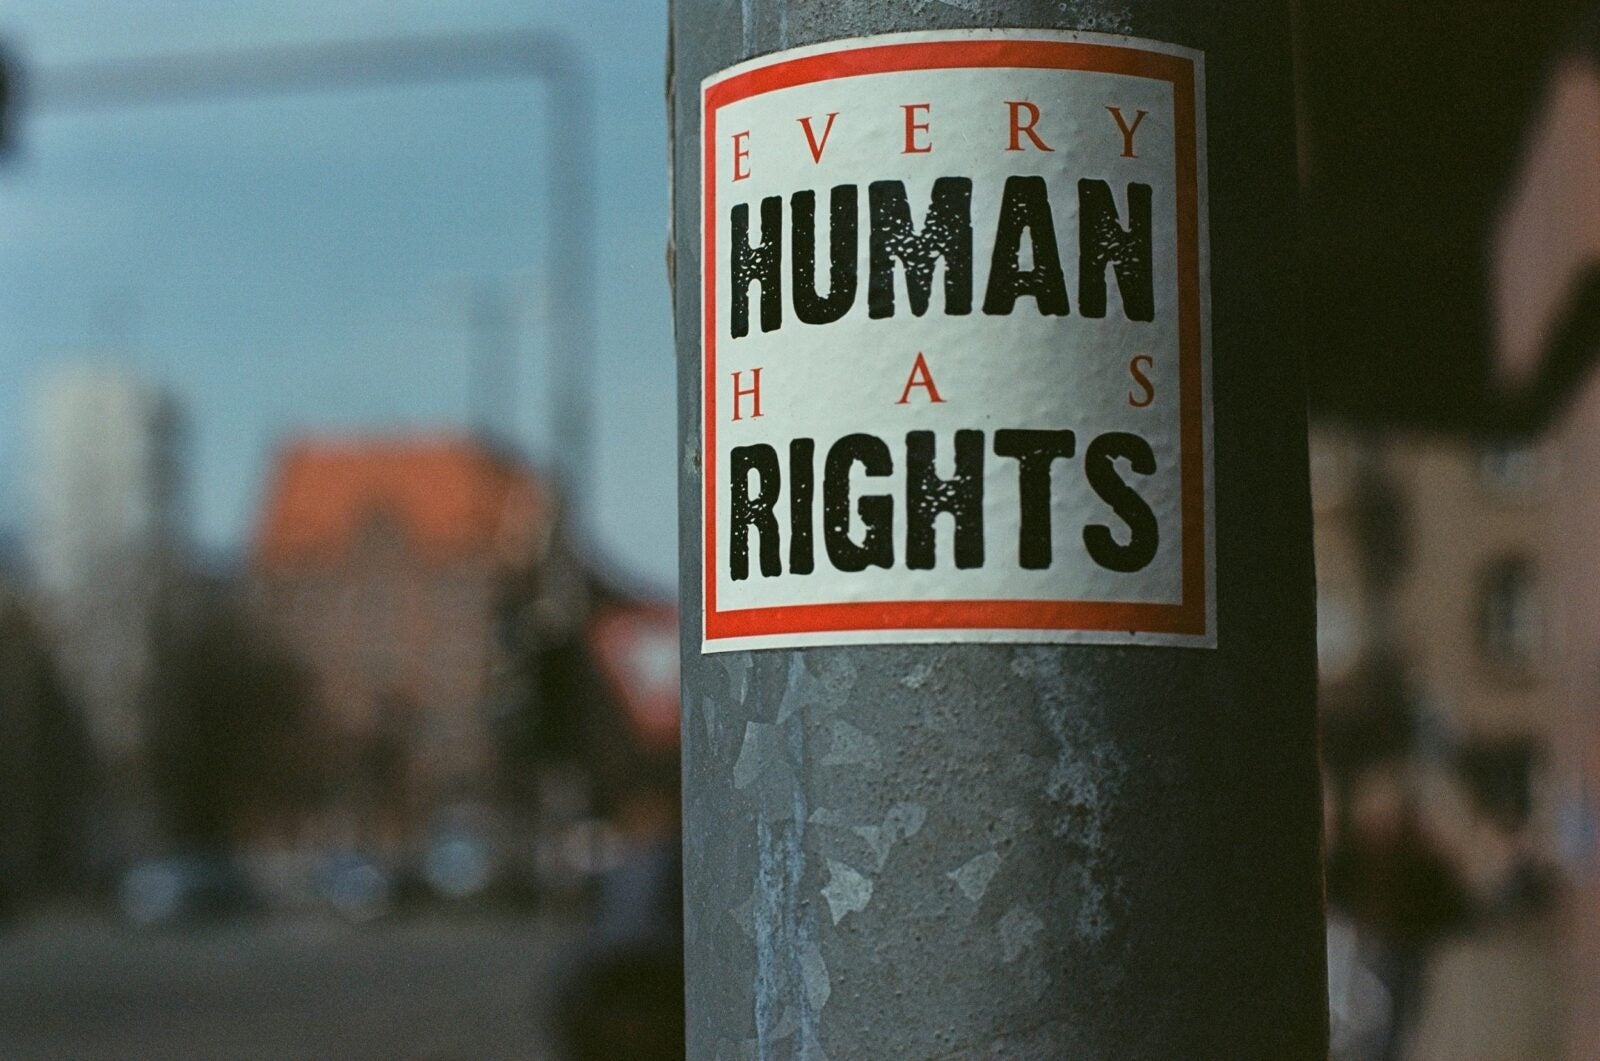 sign every human has rights
Photo by Markus Spiske on Unsplash